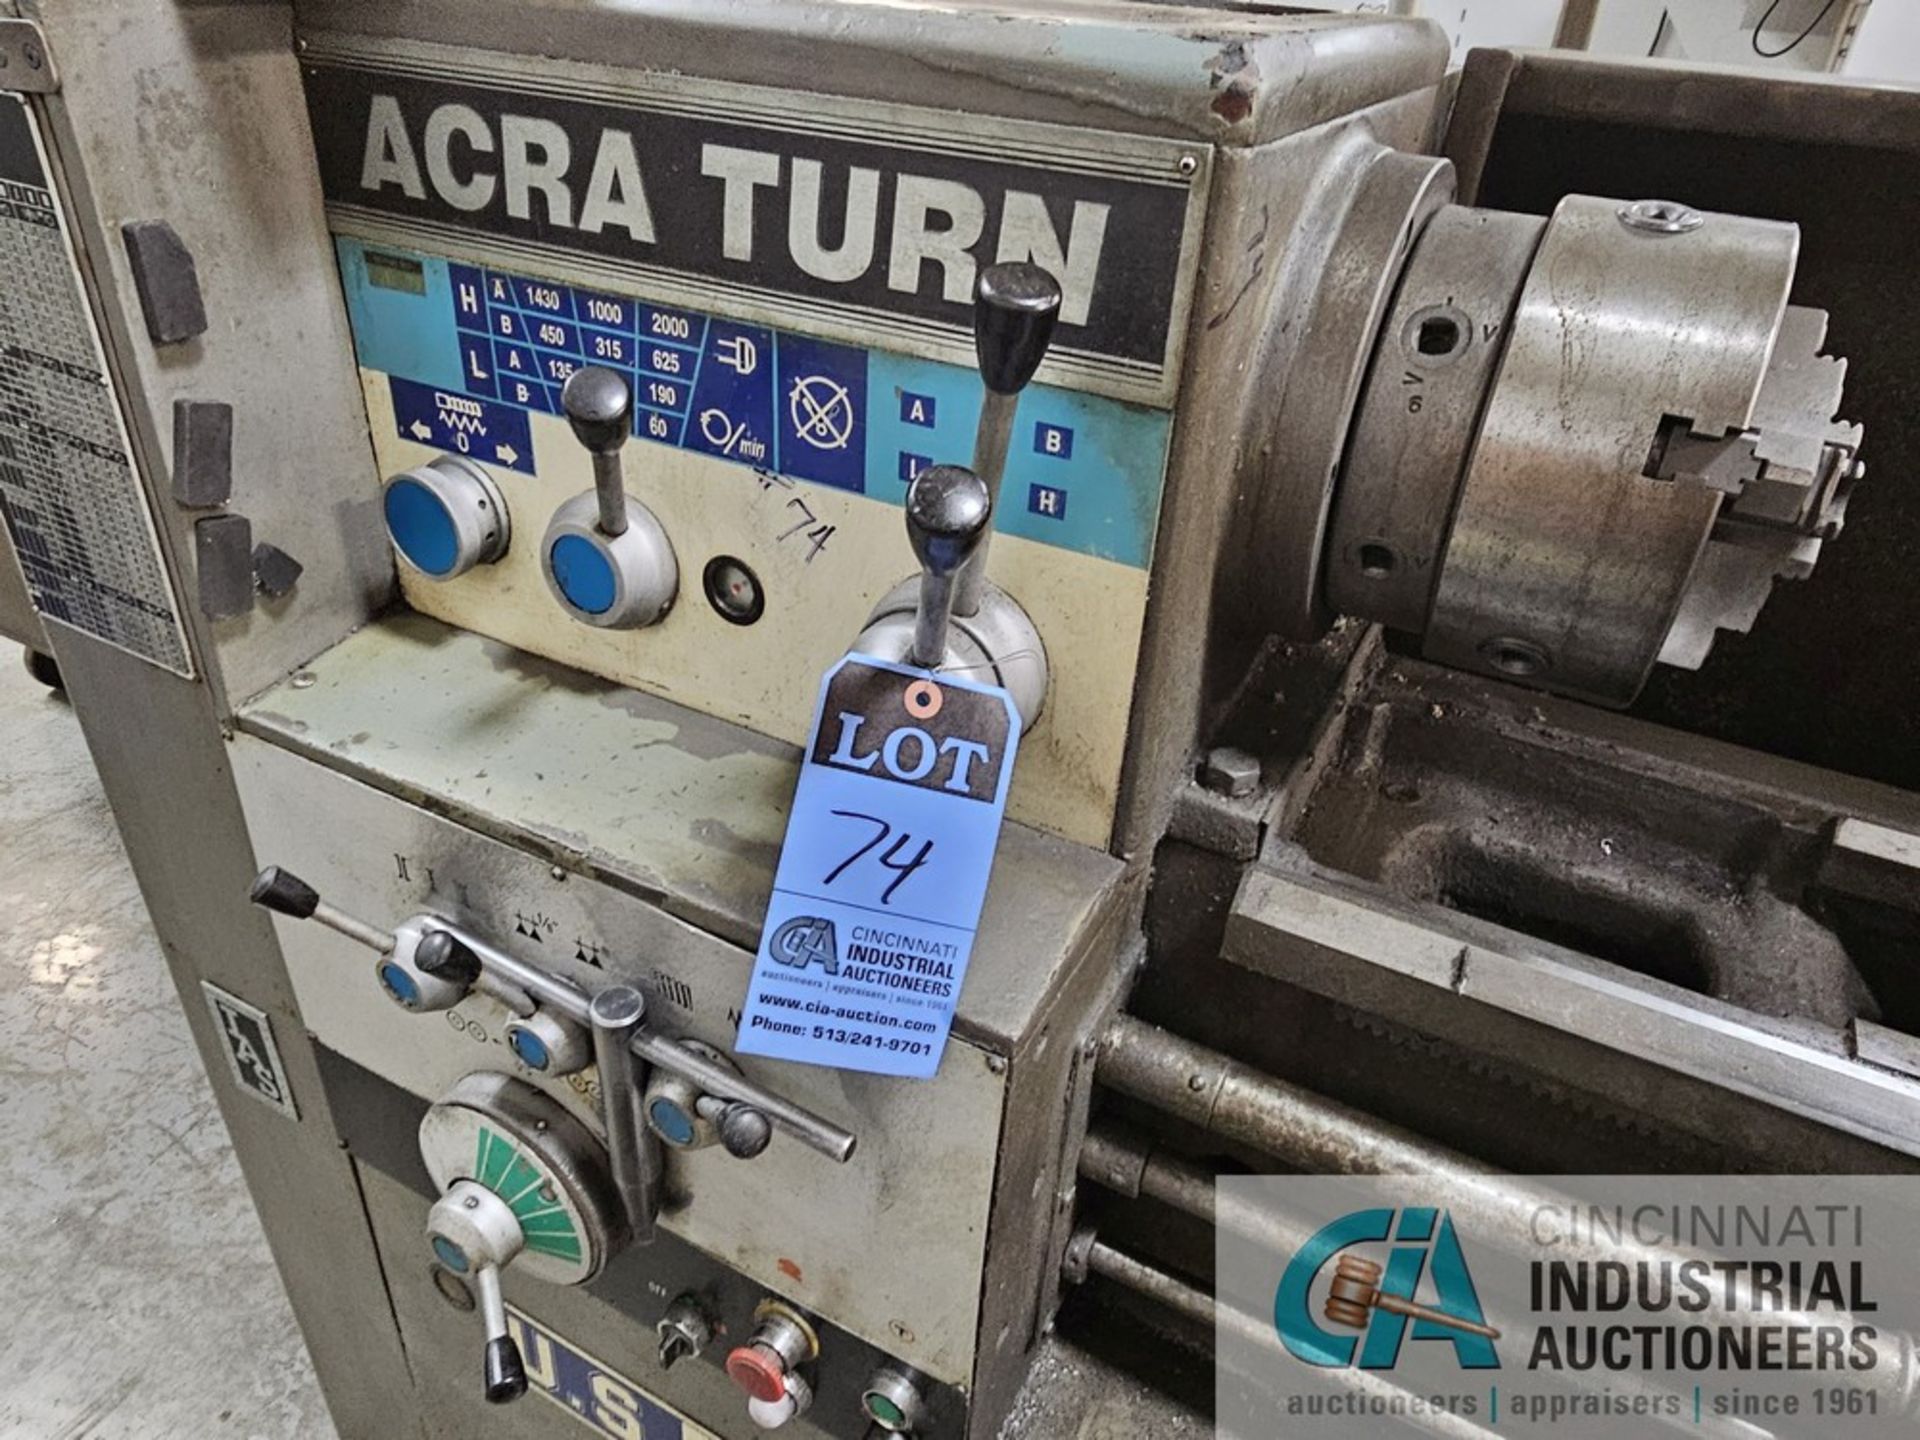 14" X 40" ACRA TURN MODEL HQ 1440/JC6236 TOOLROOM LATHE; S/N A5105263, 42-200 RPM, 8" 3-JAW CHUCK, - Image 4 of 9